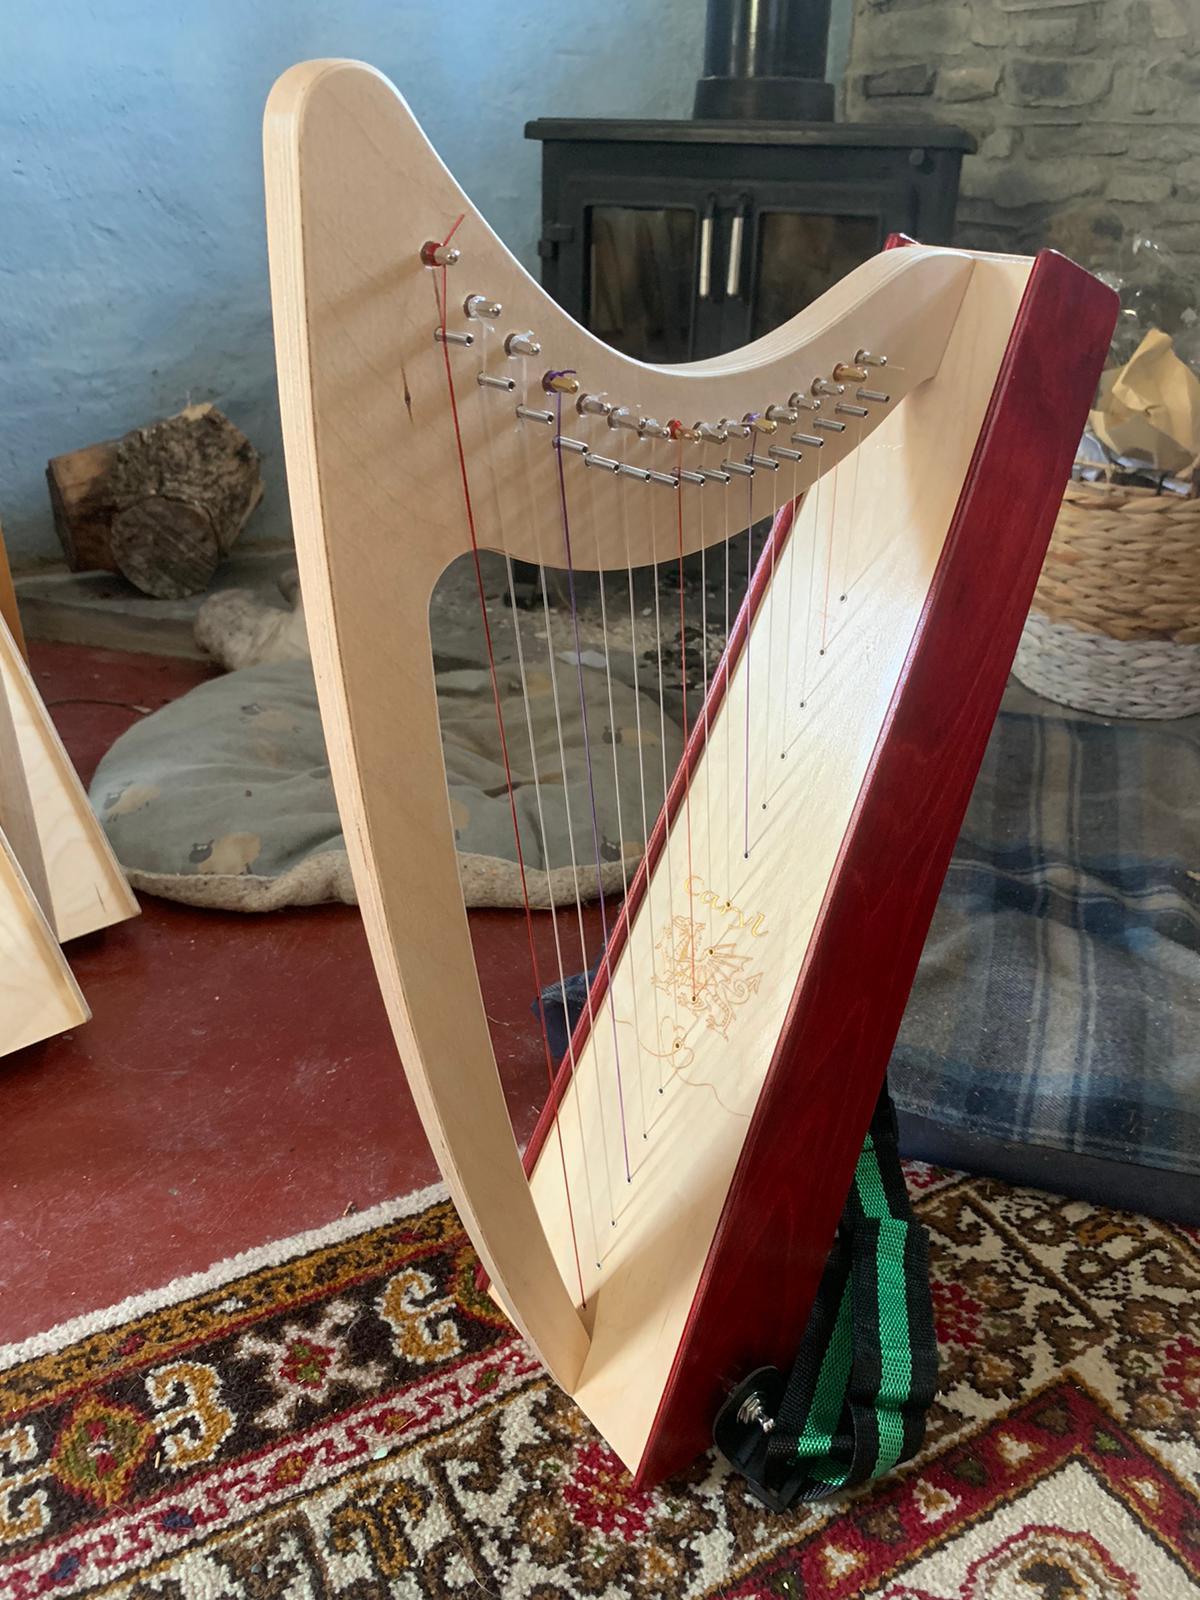 Discovery 16 - Discover the Harp at Home, includes harp, introductory book, 3 video lessons and tuning key